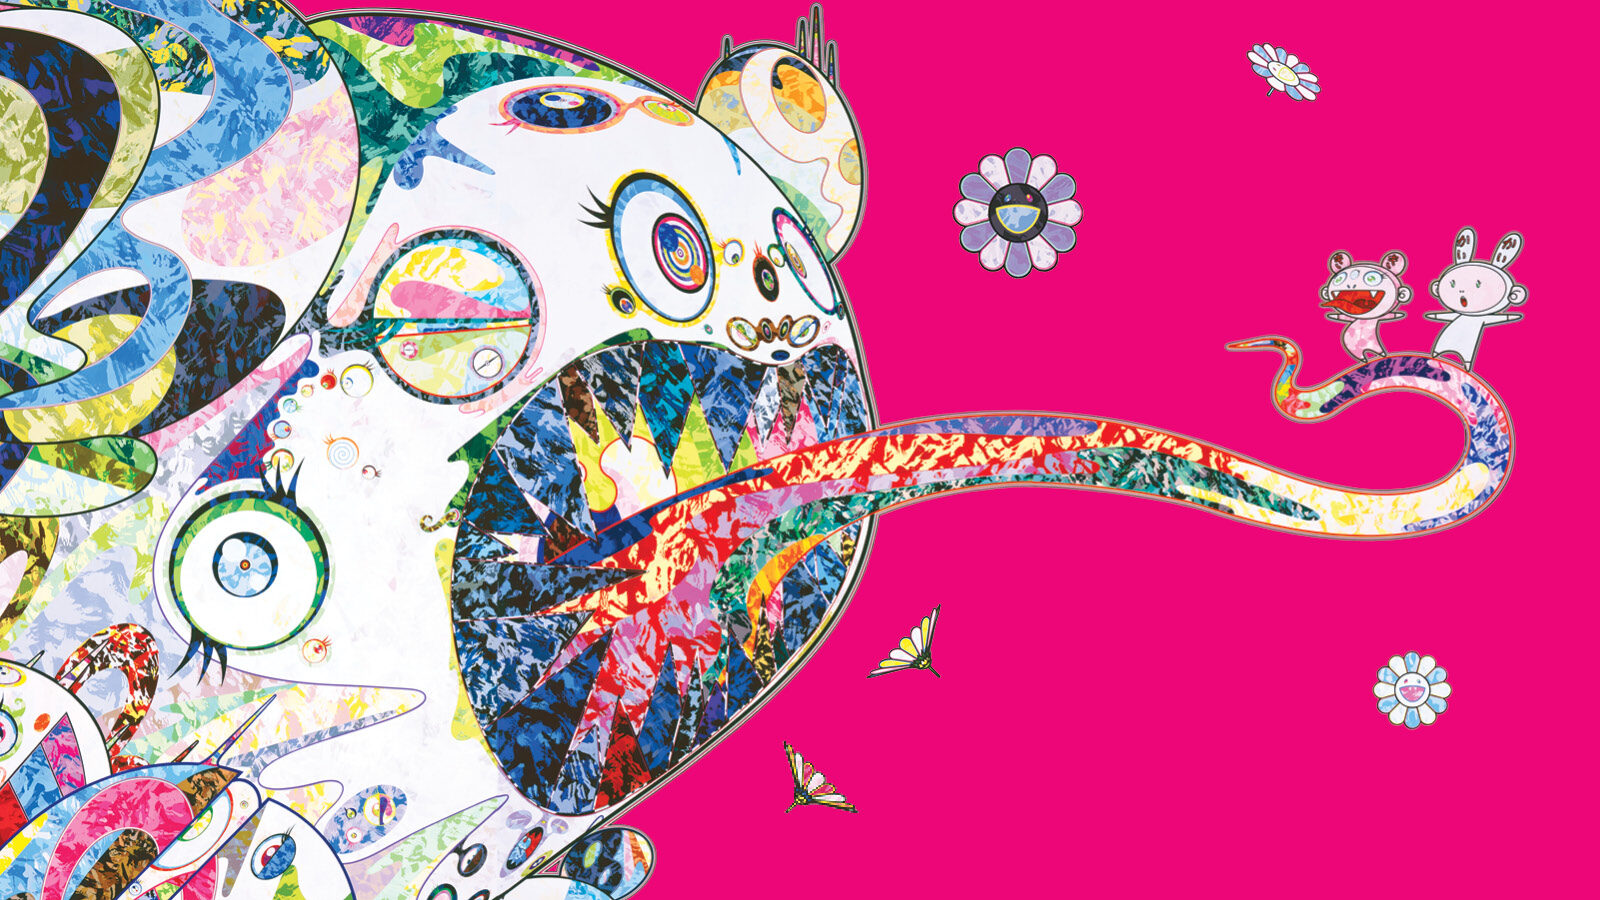 What Are Takashi Murakami's Most Famous Artworks?